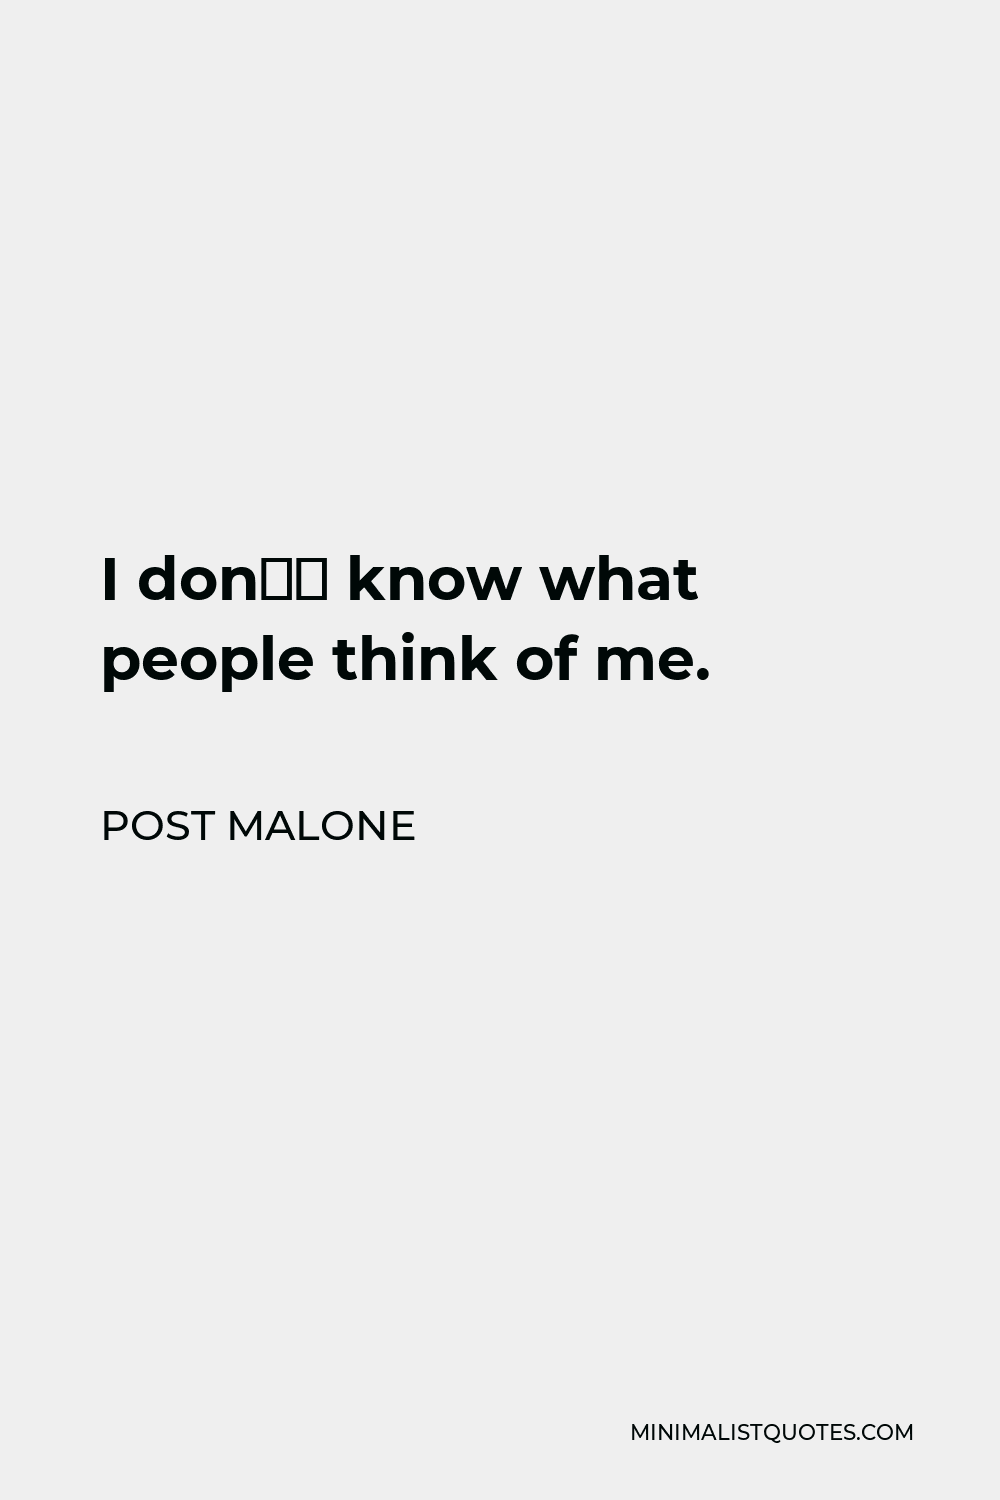 Post Malone Quote - I don’t know what people think of me.